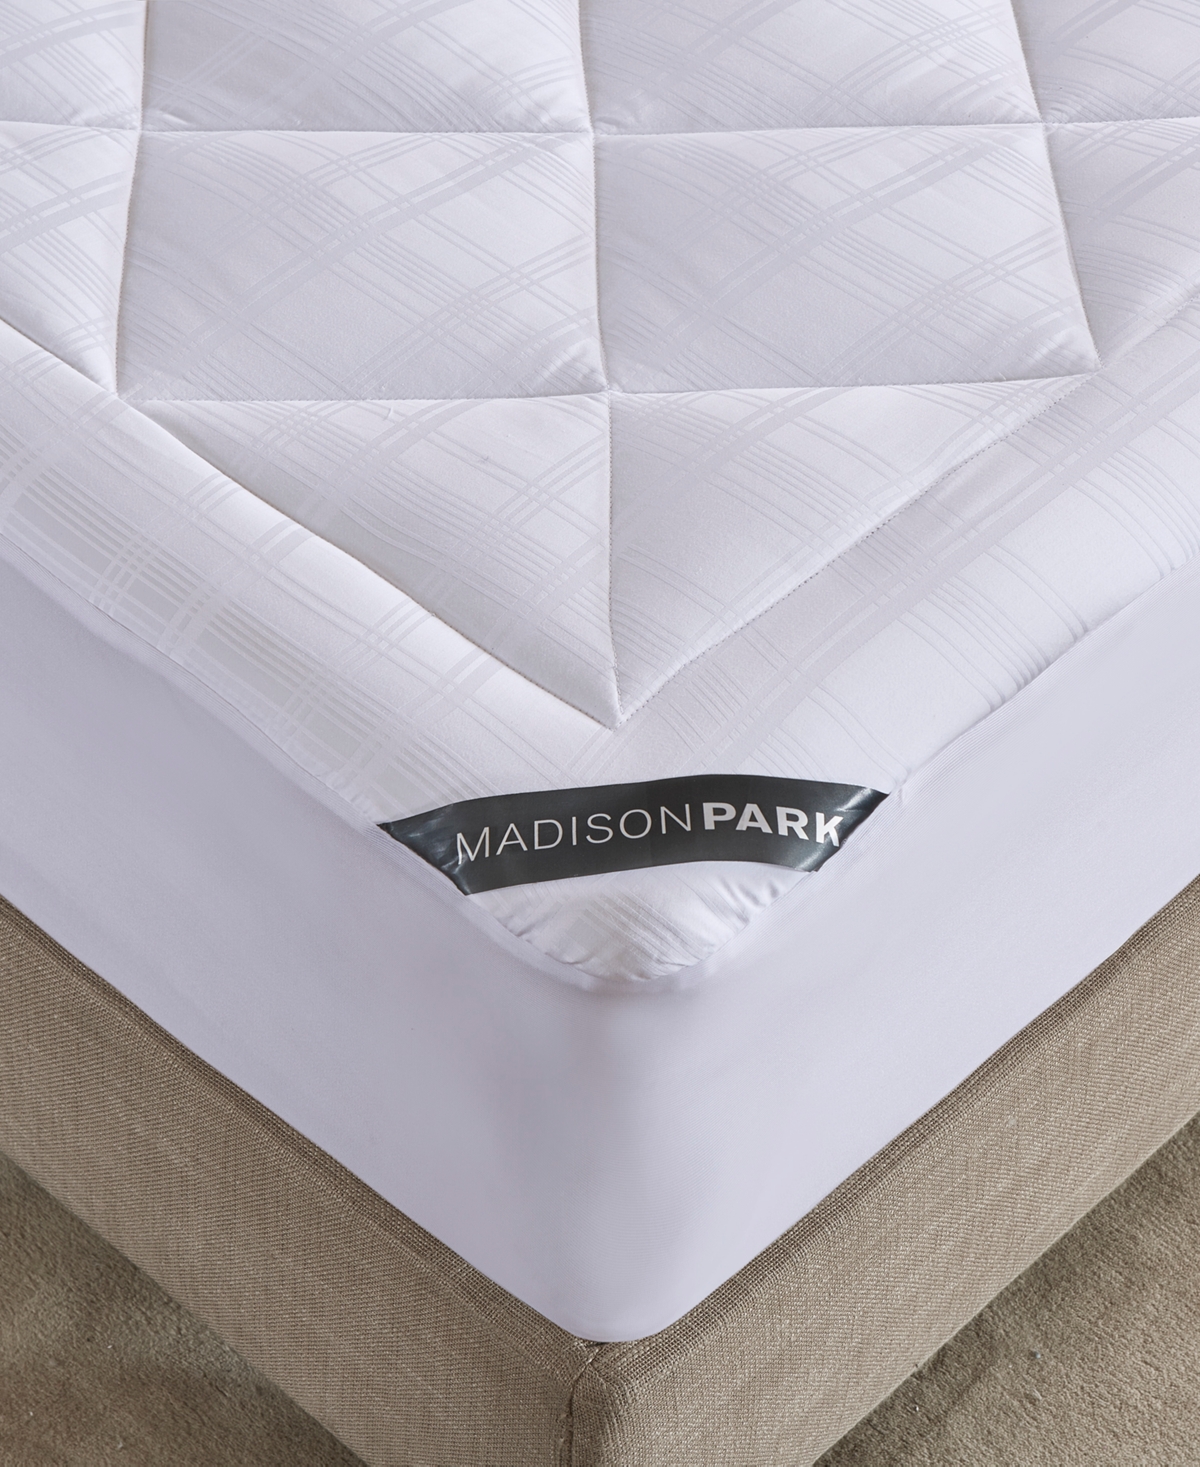 UPC 086569041104 product image for Madison Park 525 Thread Count Queen Cotton Rich Down Alternative Mattress Pad | upcitemdb.com